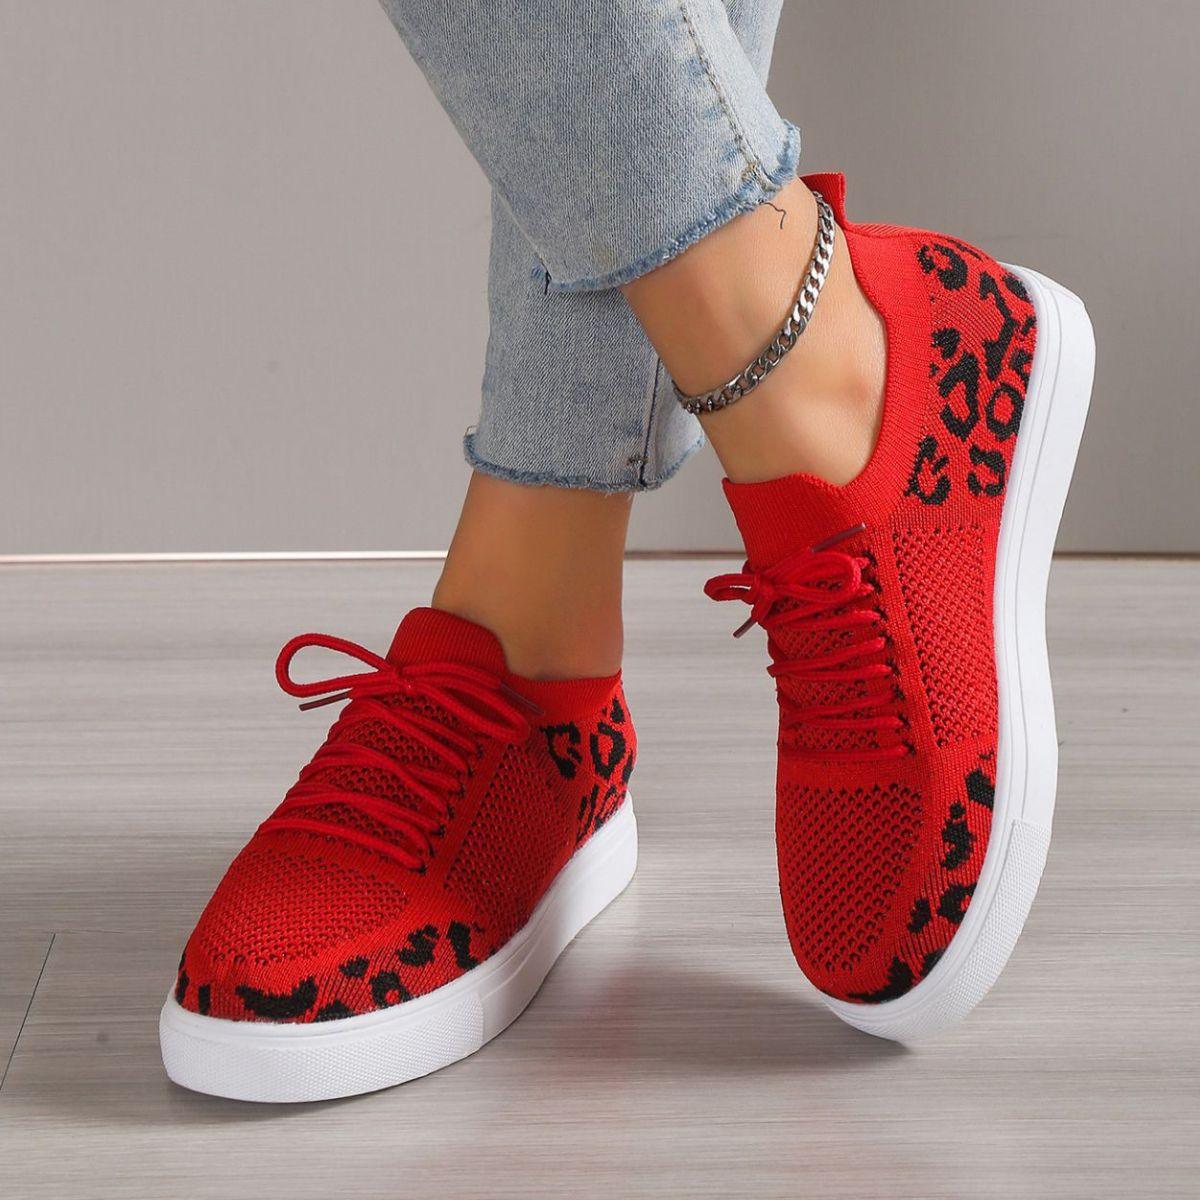 a woman wearing red sneakers with leopard print